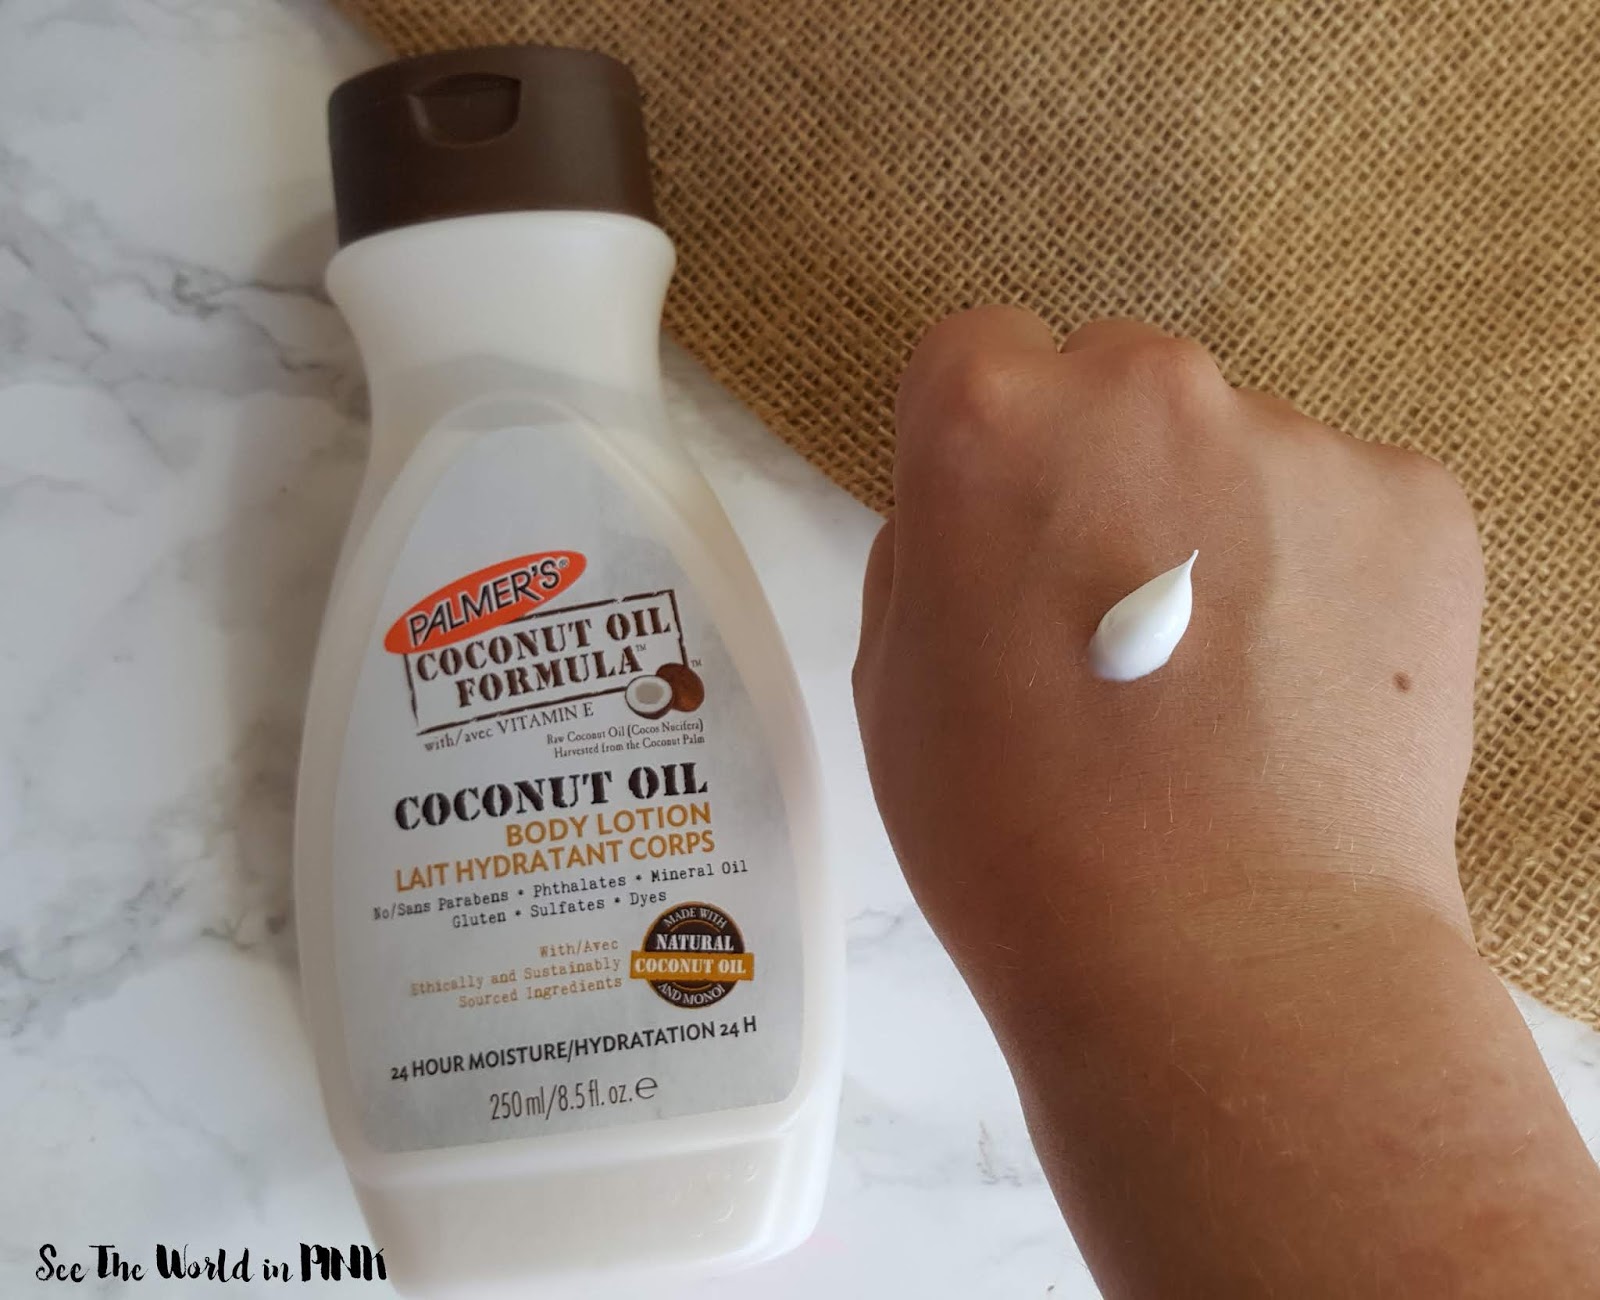 Skincare Sunday + Giveaway - Palmer's Coconut Oil Goodies! 